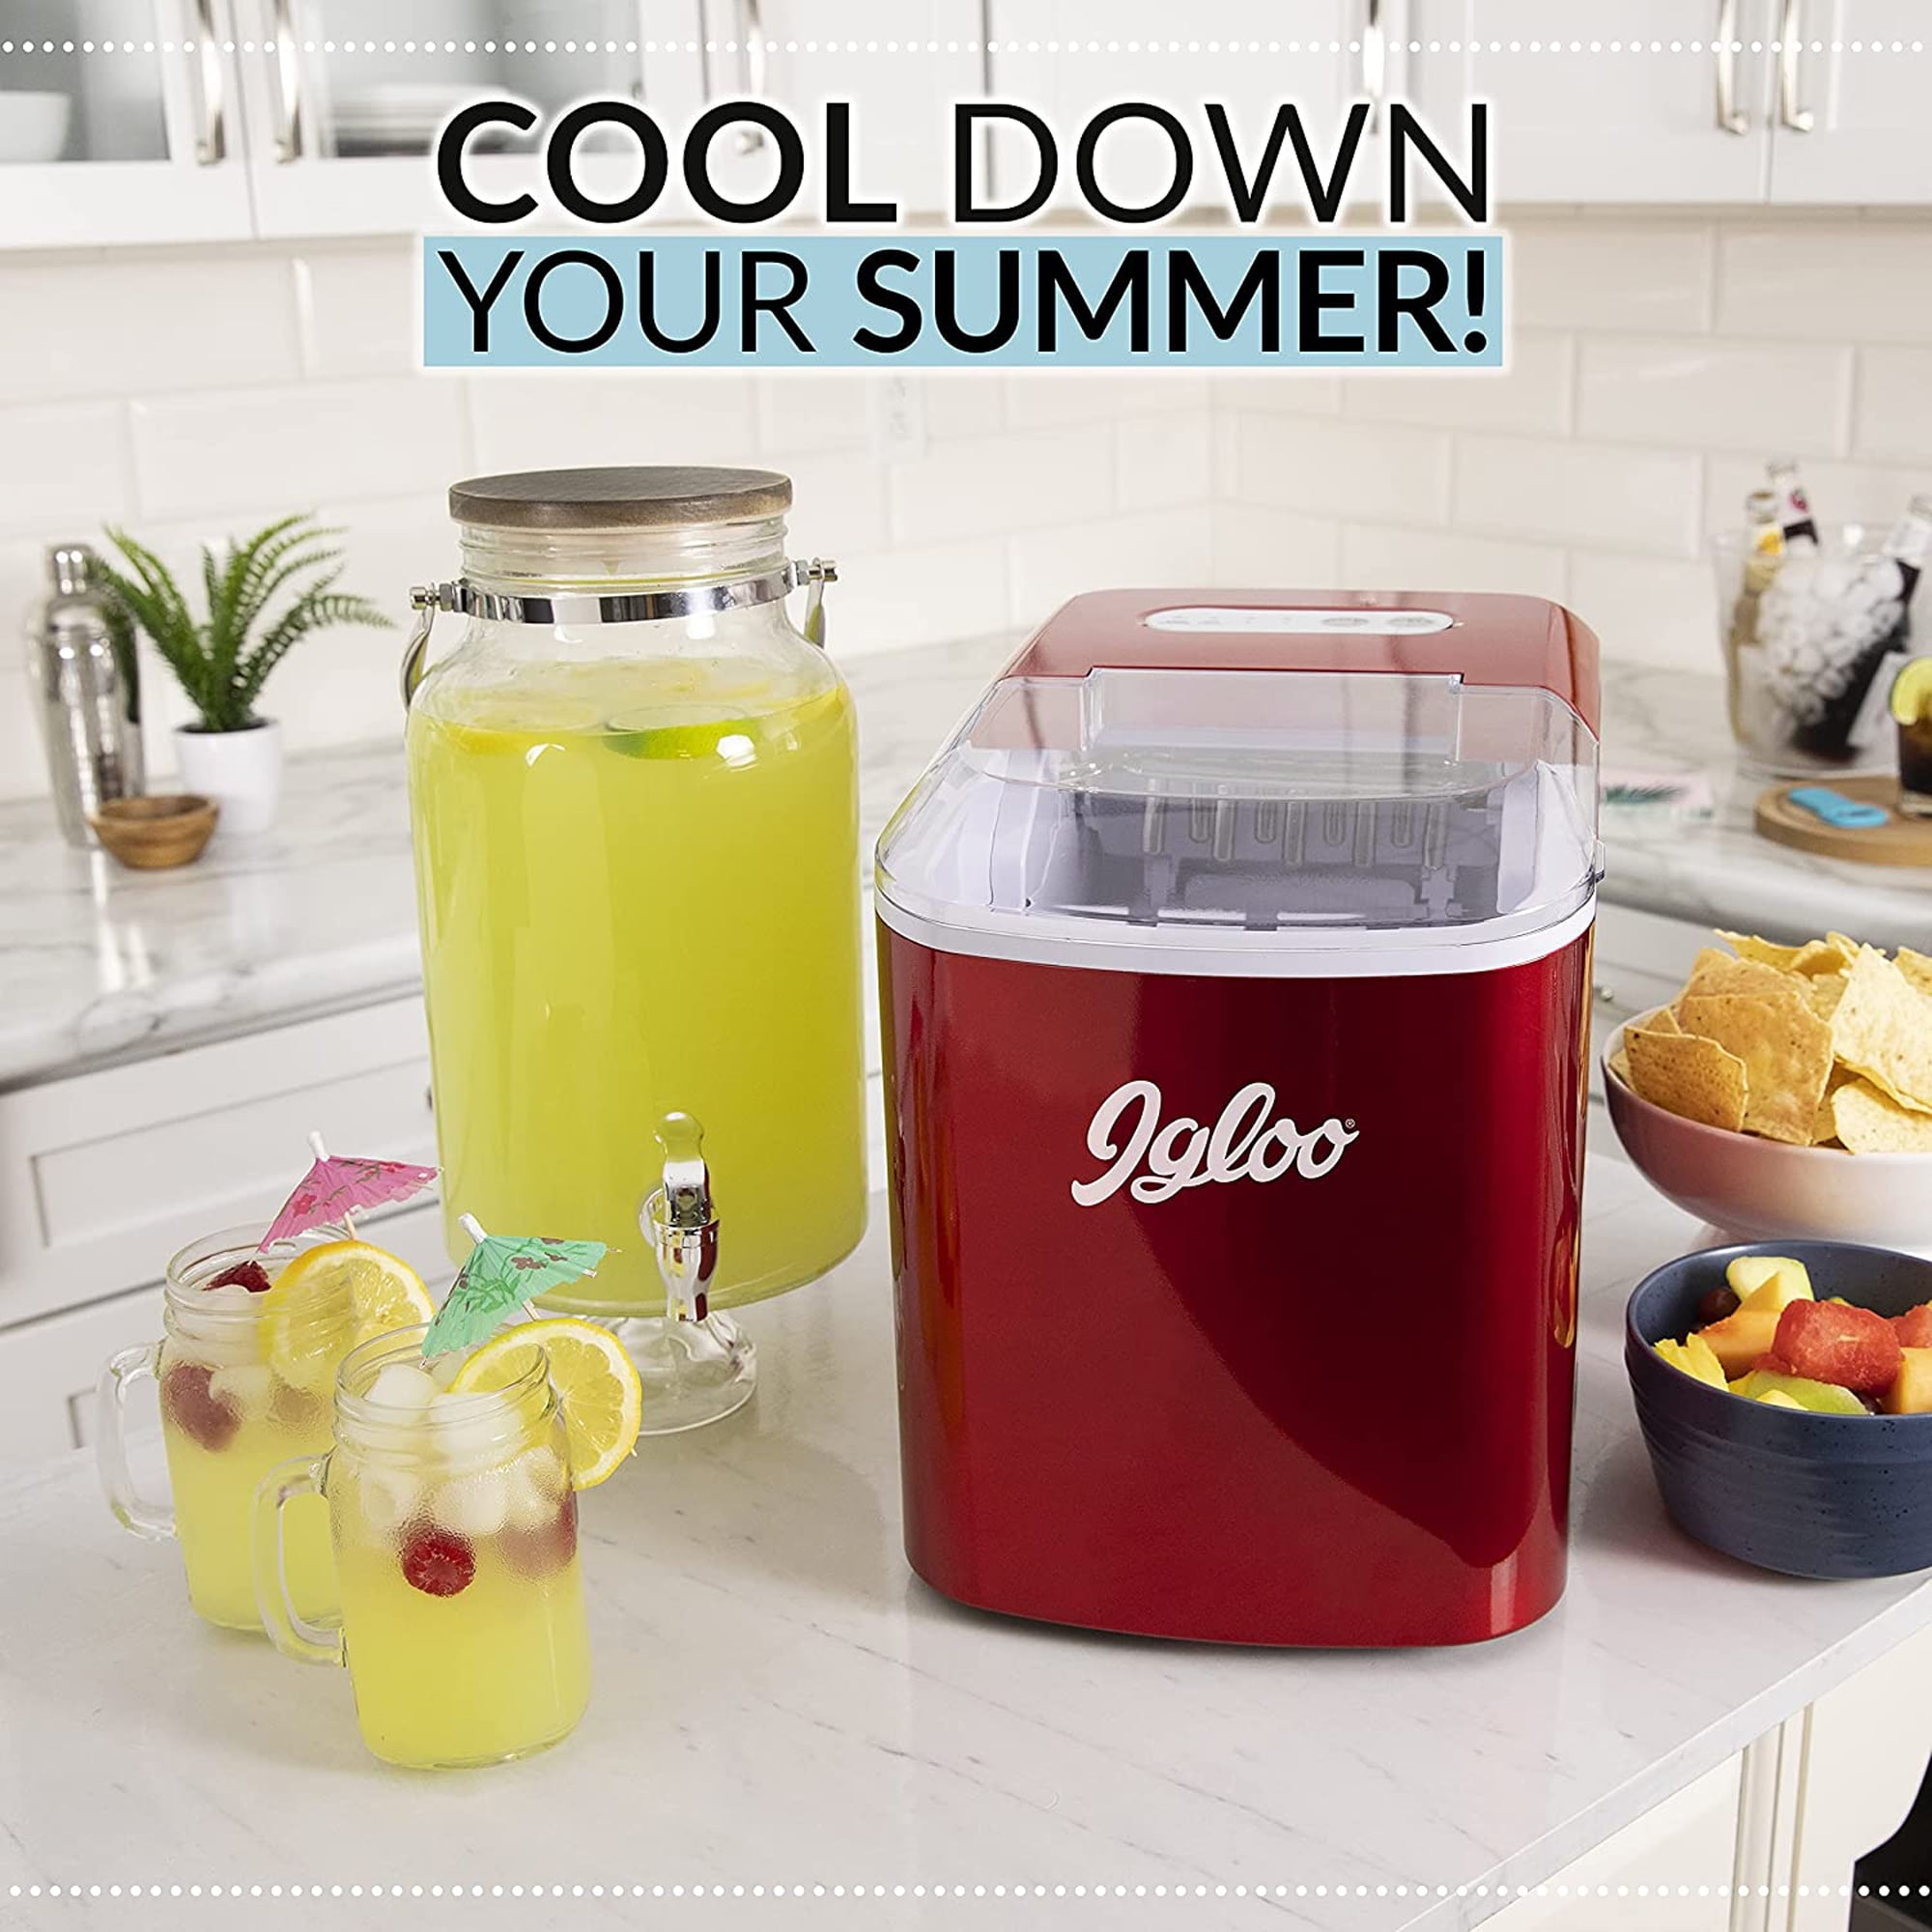 Chill Out with the Rubber Ice Maker - Your Go-To Solution for Ice